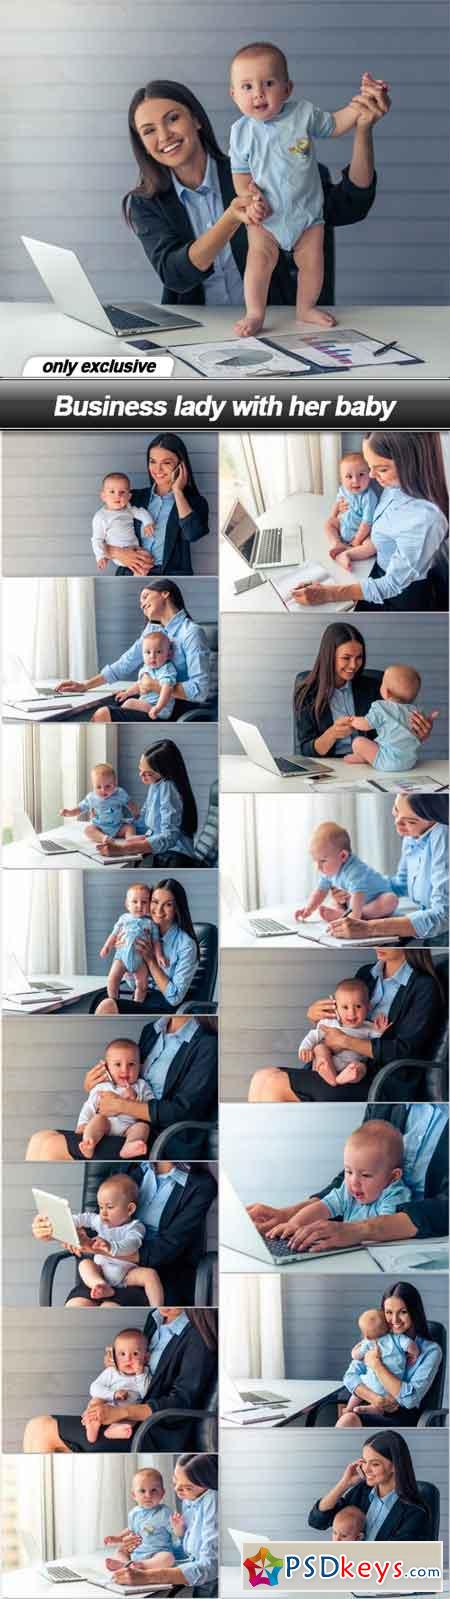 Business lady with her baby - 16 UHQ JPEG